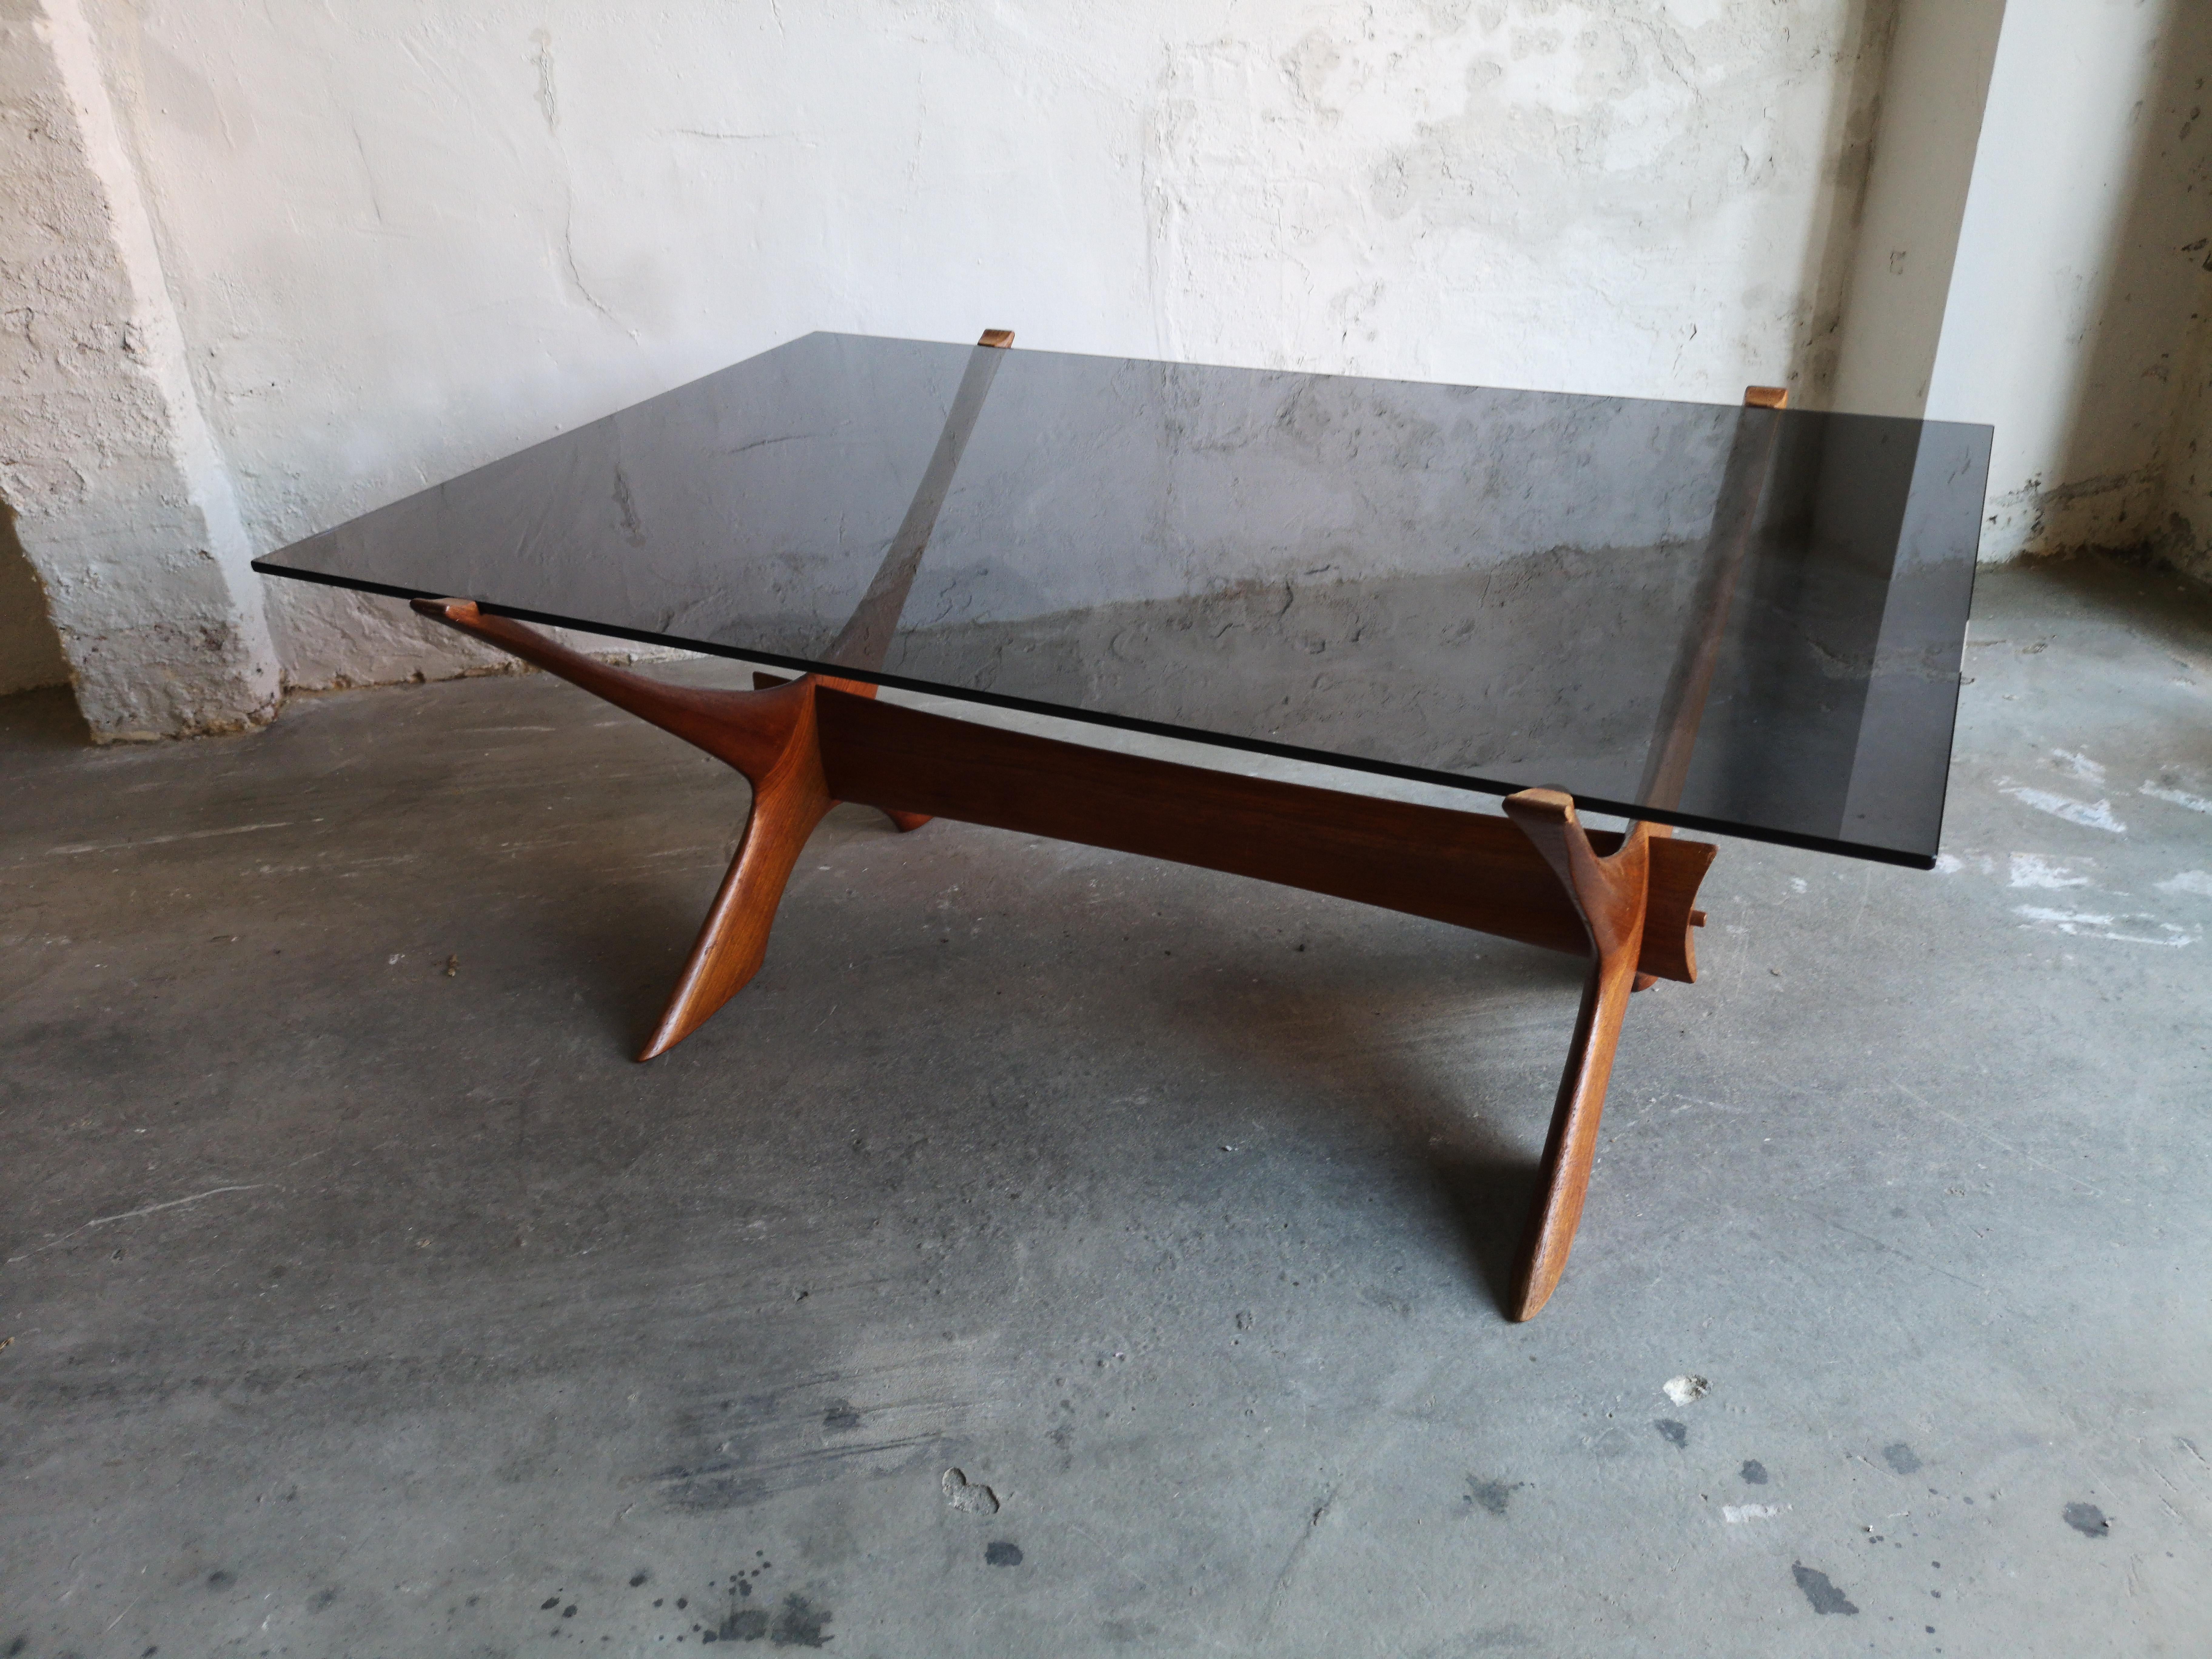 This stunning teak and glass coffee table was designed by Fredrik Schriever-Abeln for O¨rebro Glasfabrik in Sweden in the 1960s. The teak frame is in very good vintage condition with some signs of use as expected for a 50 year old table.

The